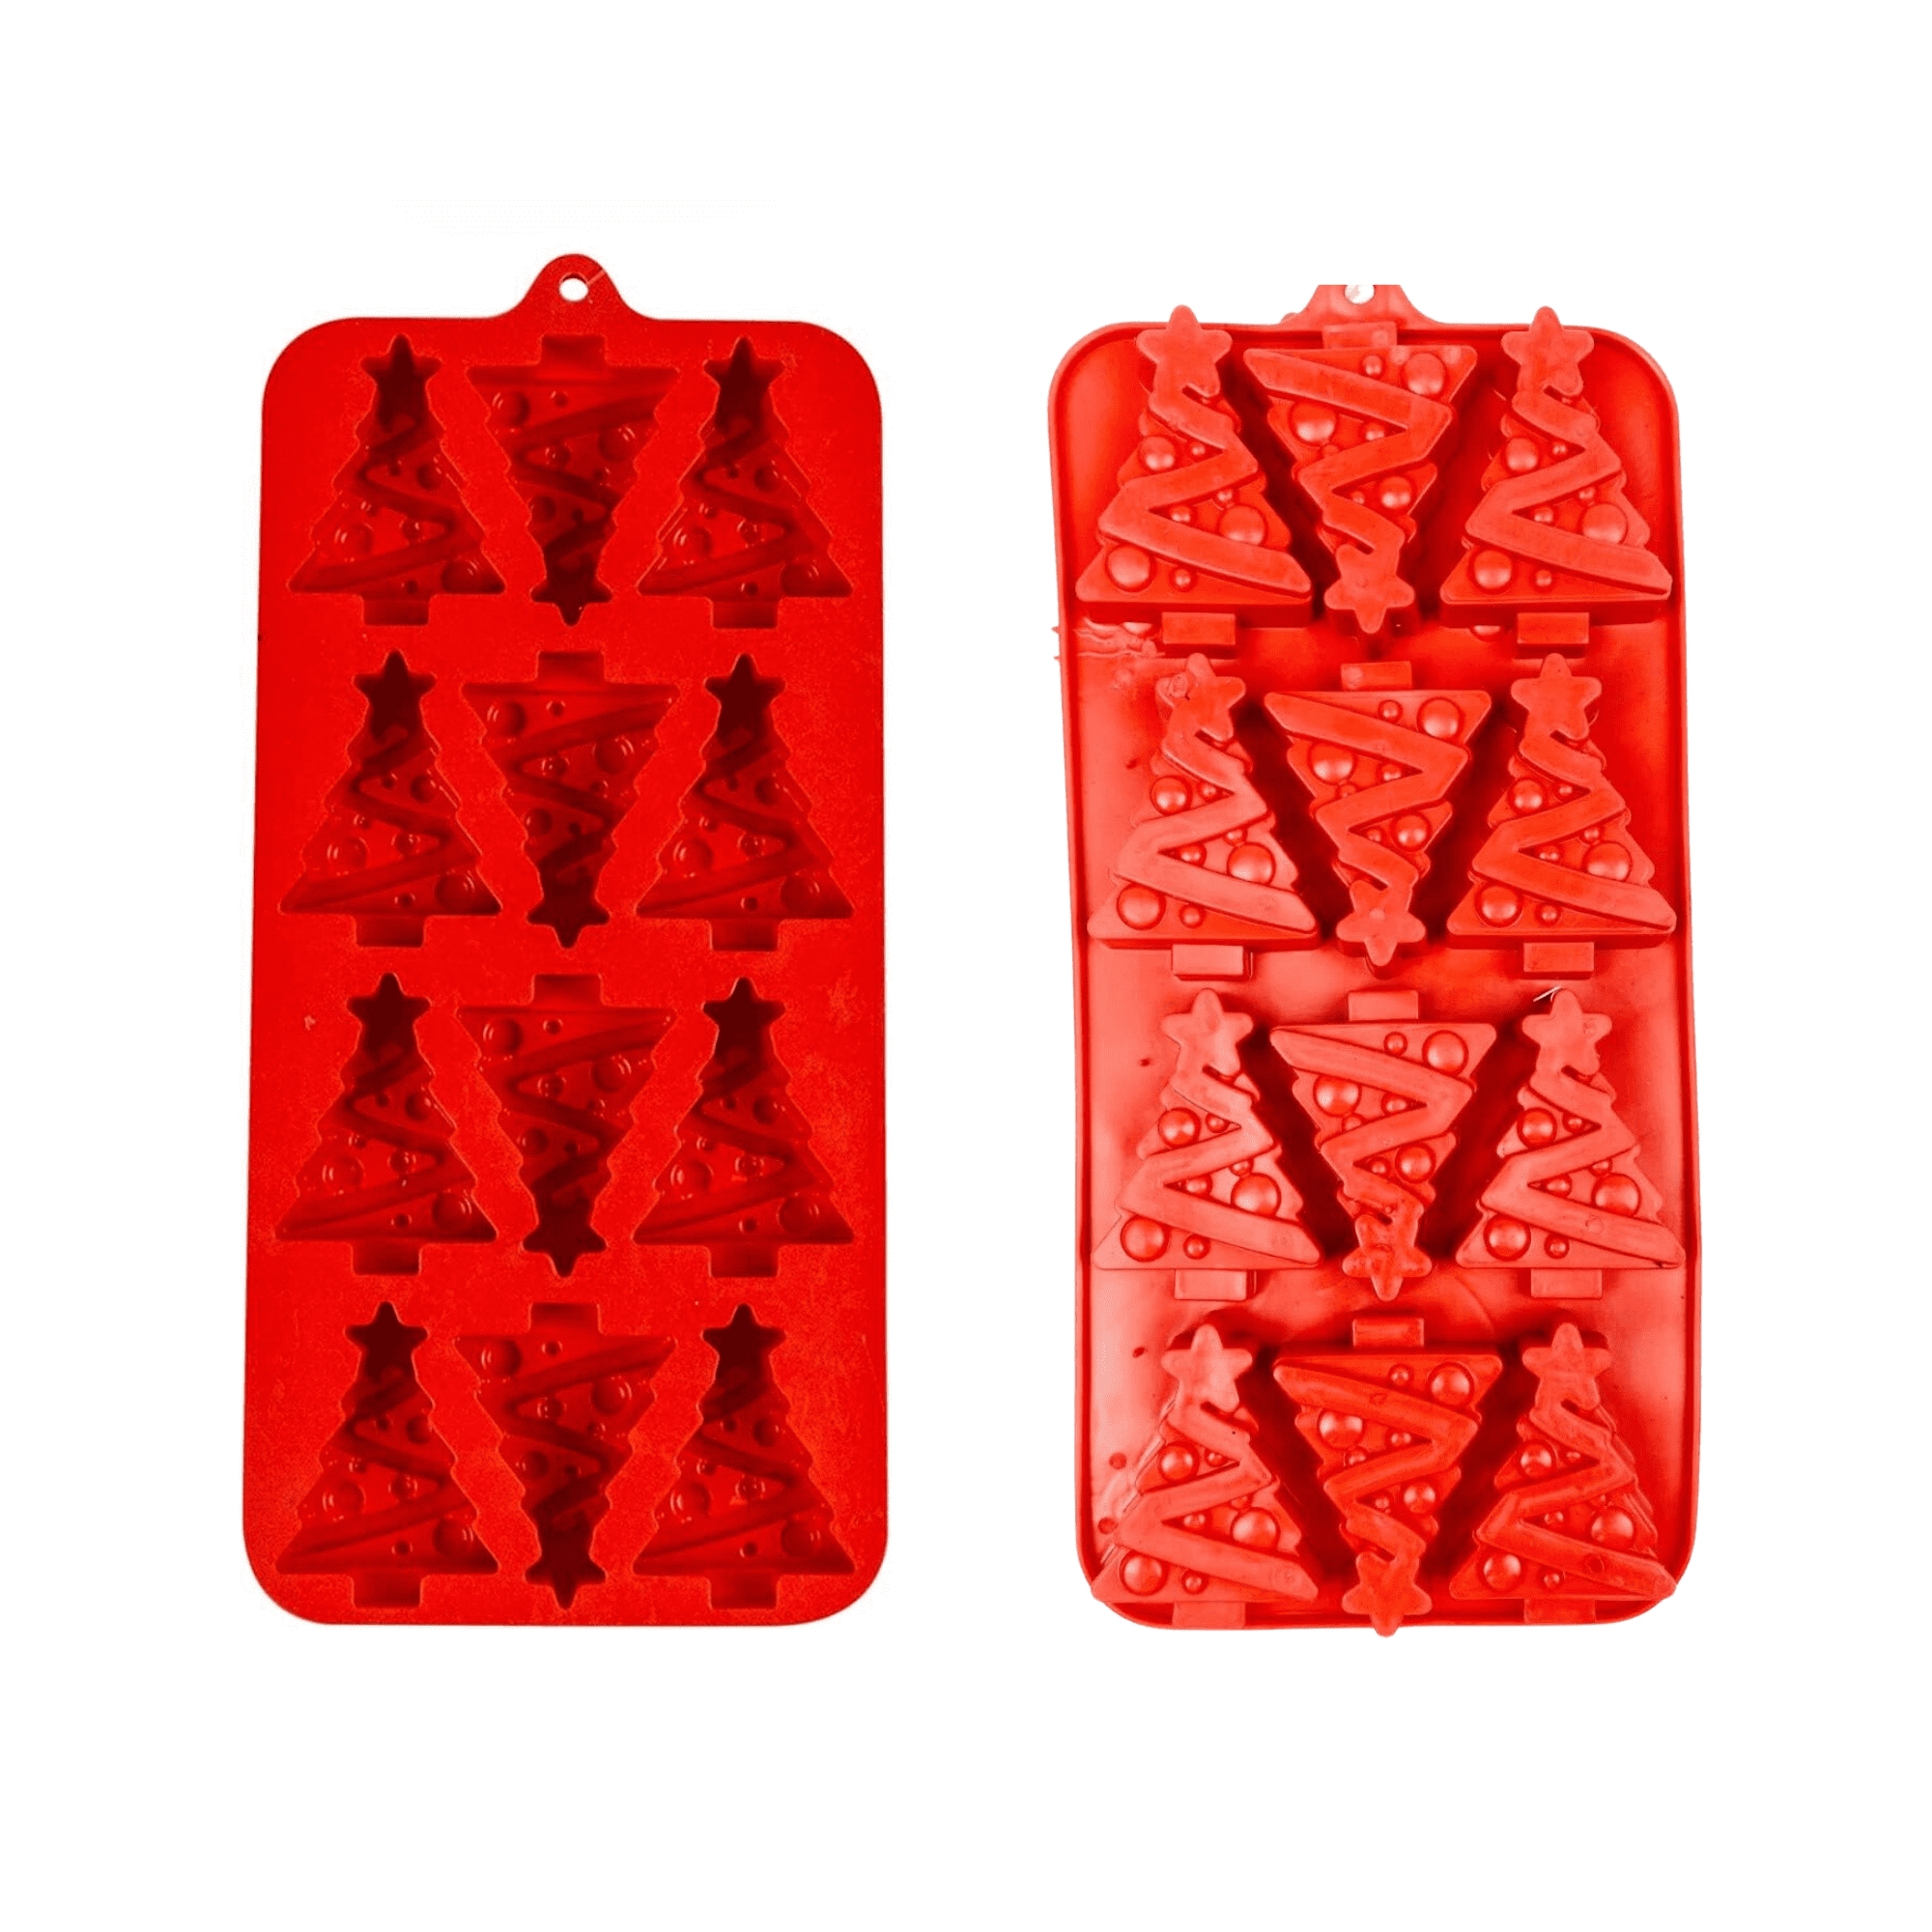 Holiday Ice Cube Trays, Christmas Candy Molds, Santa candy Molds, Christmas  tree Ice Pop Molds 2 pack (Christmas tree shaped) (Snowman shaped)